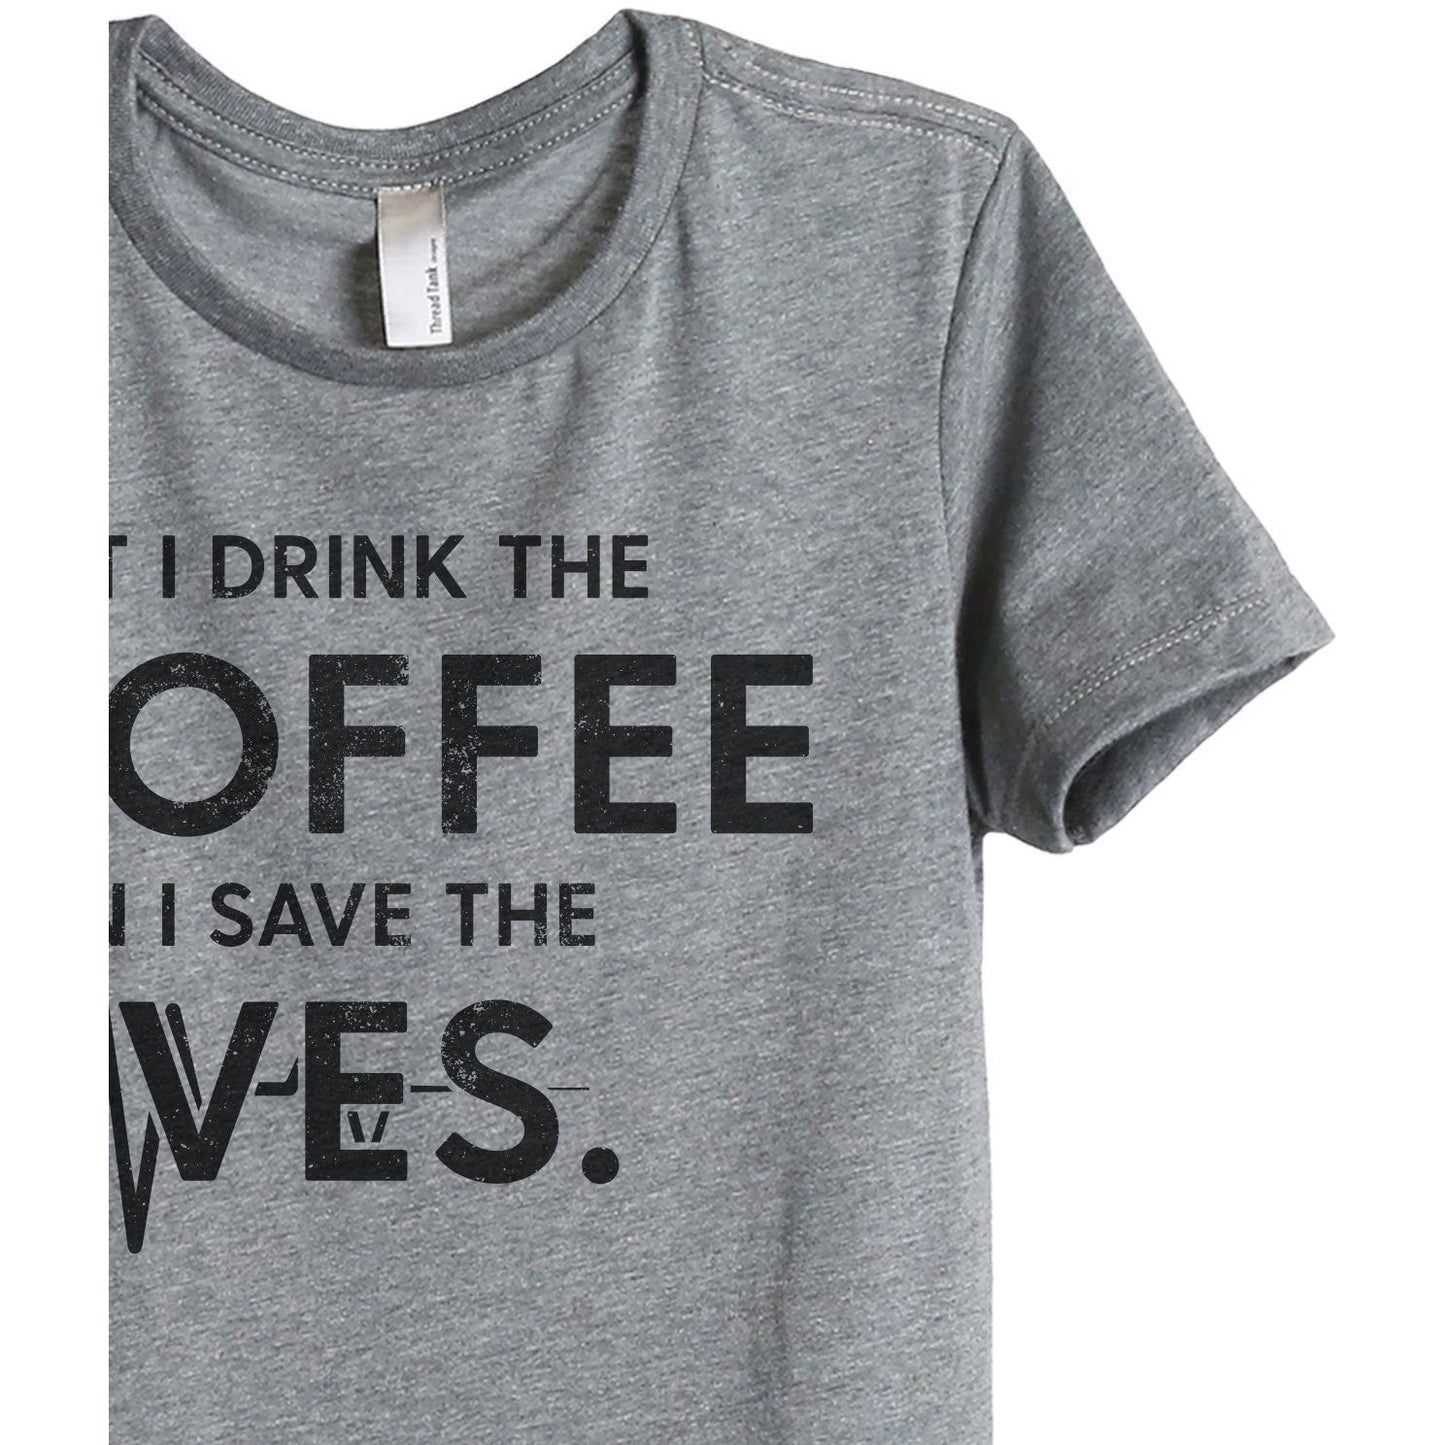 First I Drink The Coffee Then I Save The Lives Women's Relaxed Crewneck T-Shirt Top Tee Heather Grey Zoom Details
